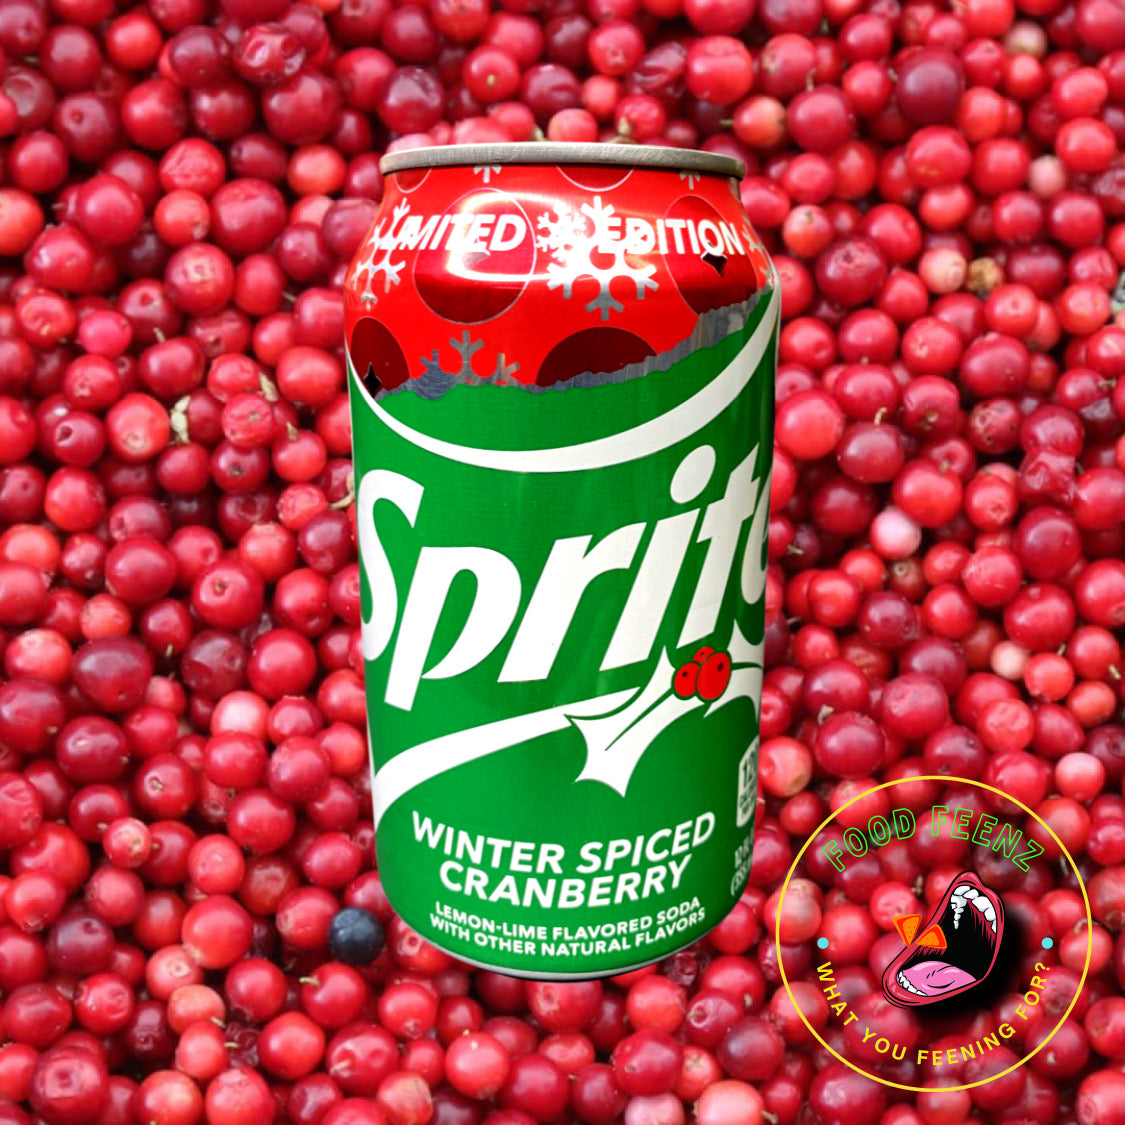 Sprite Winter Spiced Cranberry (Limited Edition)